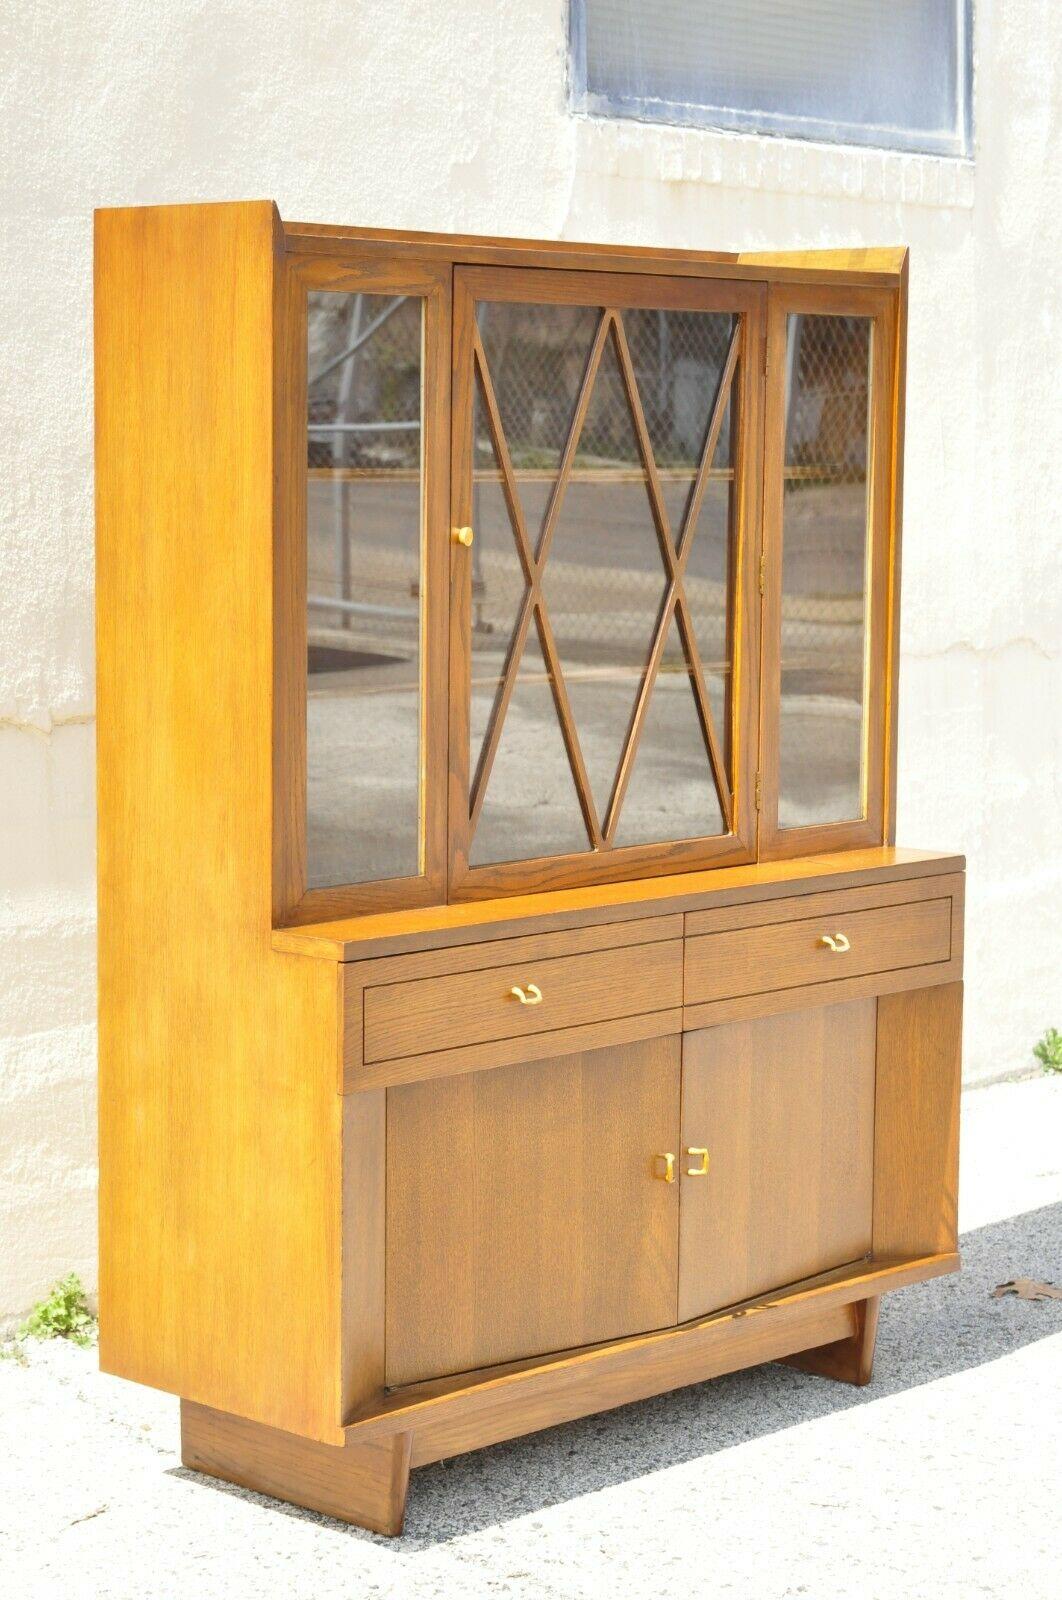 Raymond Loewy Mengel Mid-Century Modern sculpted oak china cabinet. Item features a beautiful wood grain, 3 swing doors, 2 drawers, very nice vintage item, sleek sculptural form. *Color is a bit more brown indoors. Circa mid-20th century.